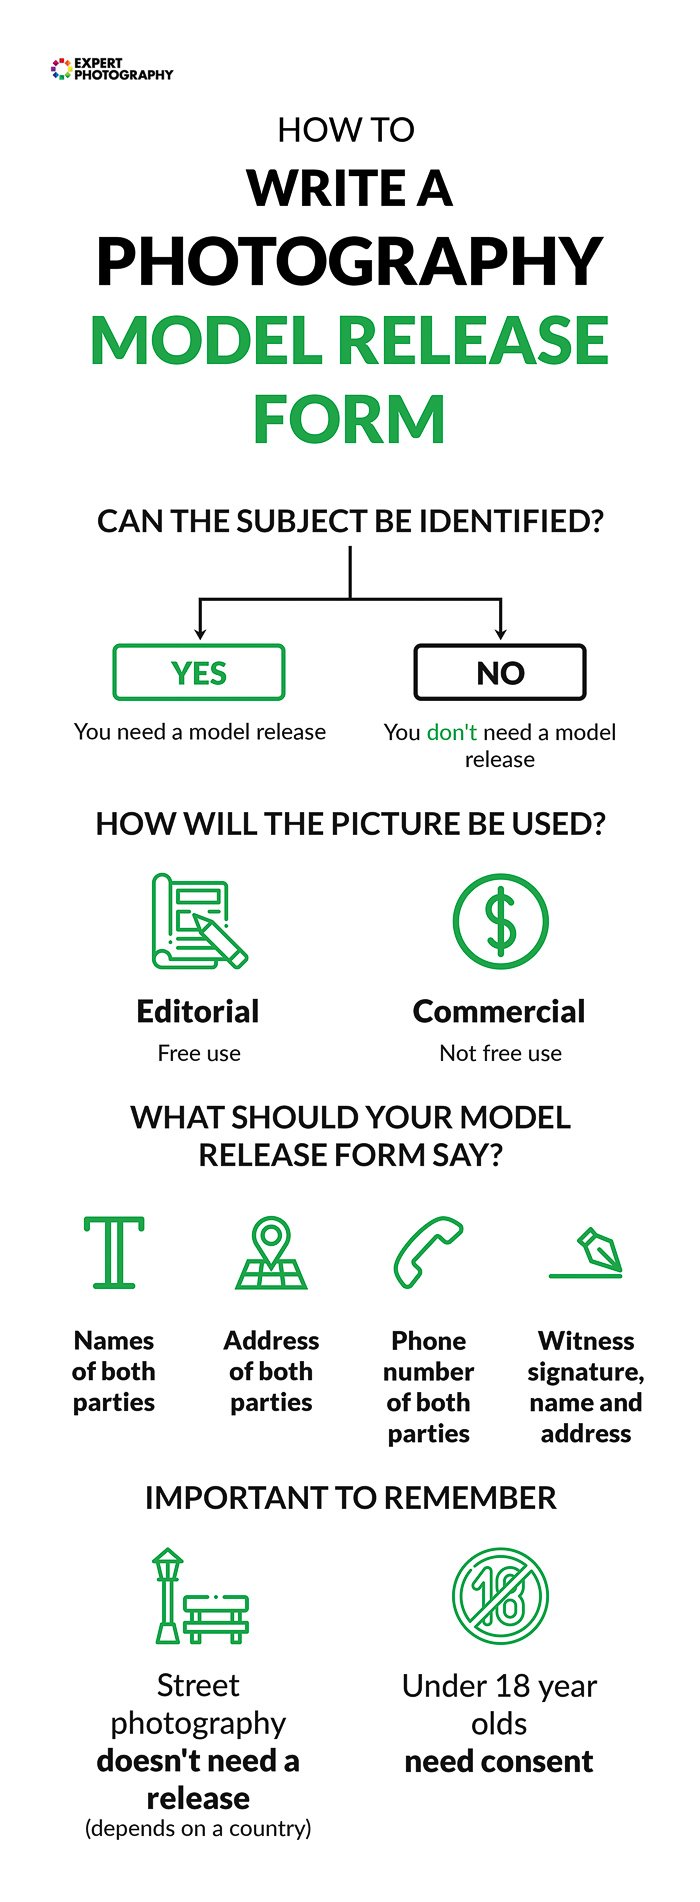 Free photography cheat sheets for writing a model release form